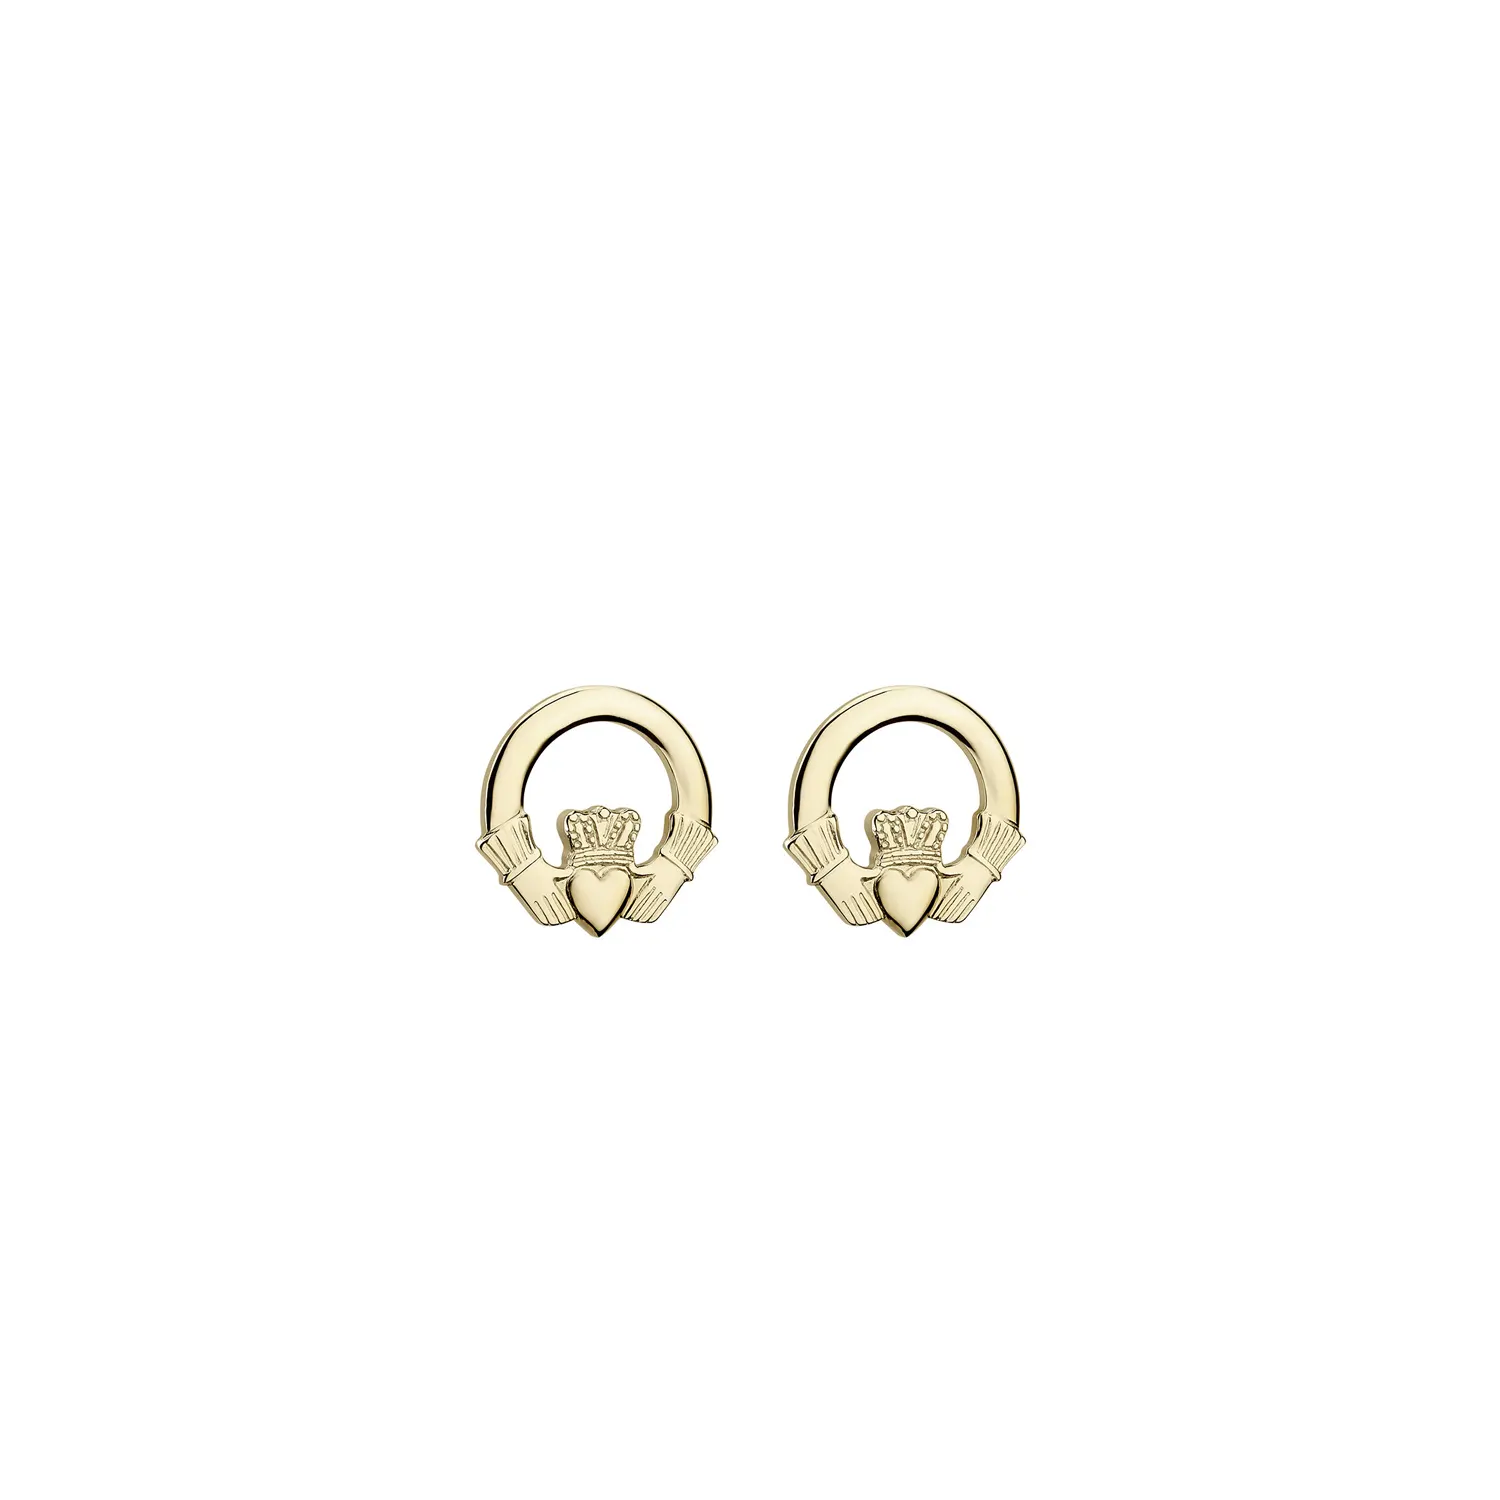 14ct. Yellow Gold Claddagh Stud Earrings